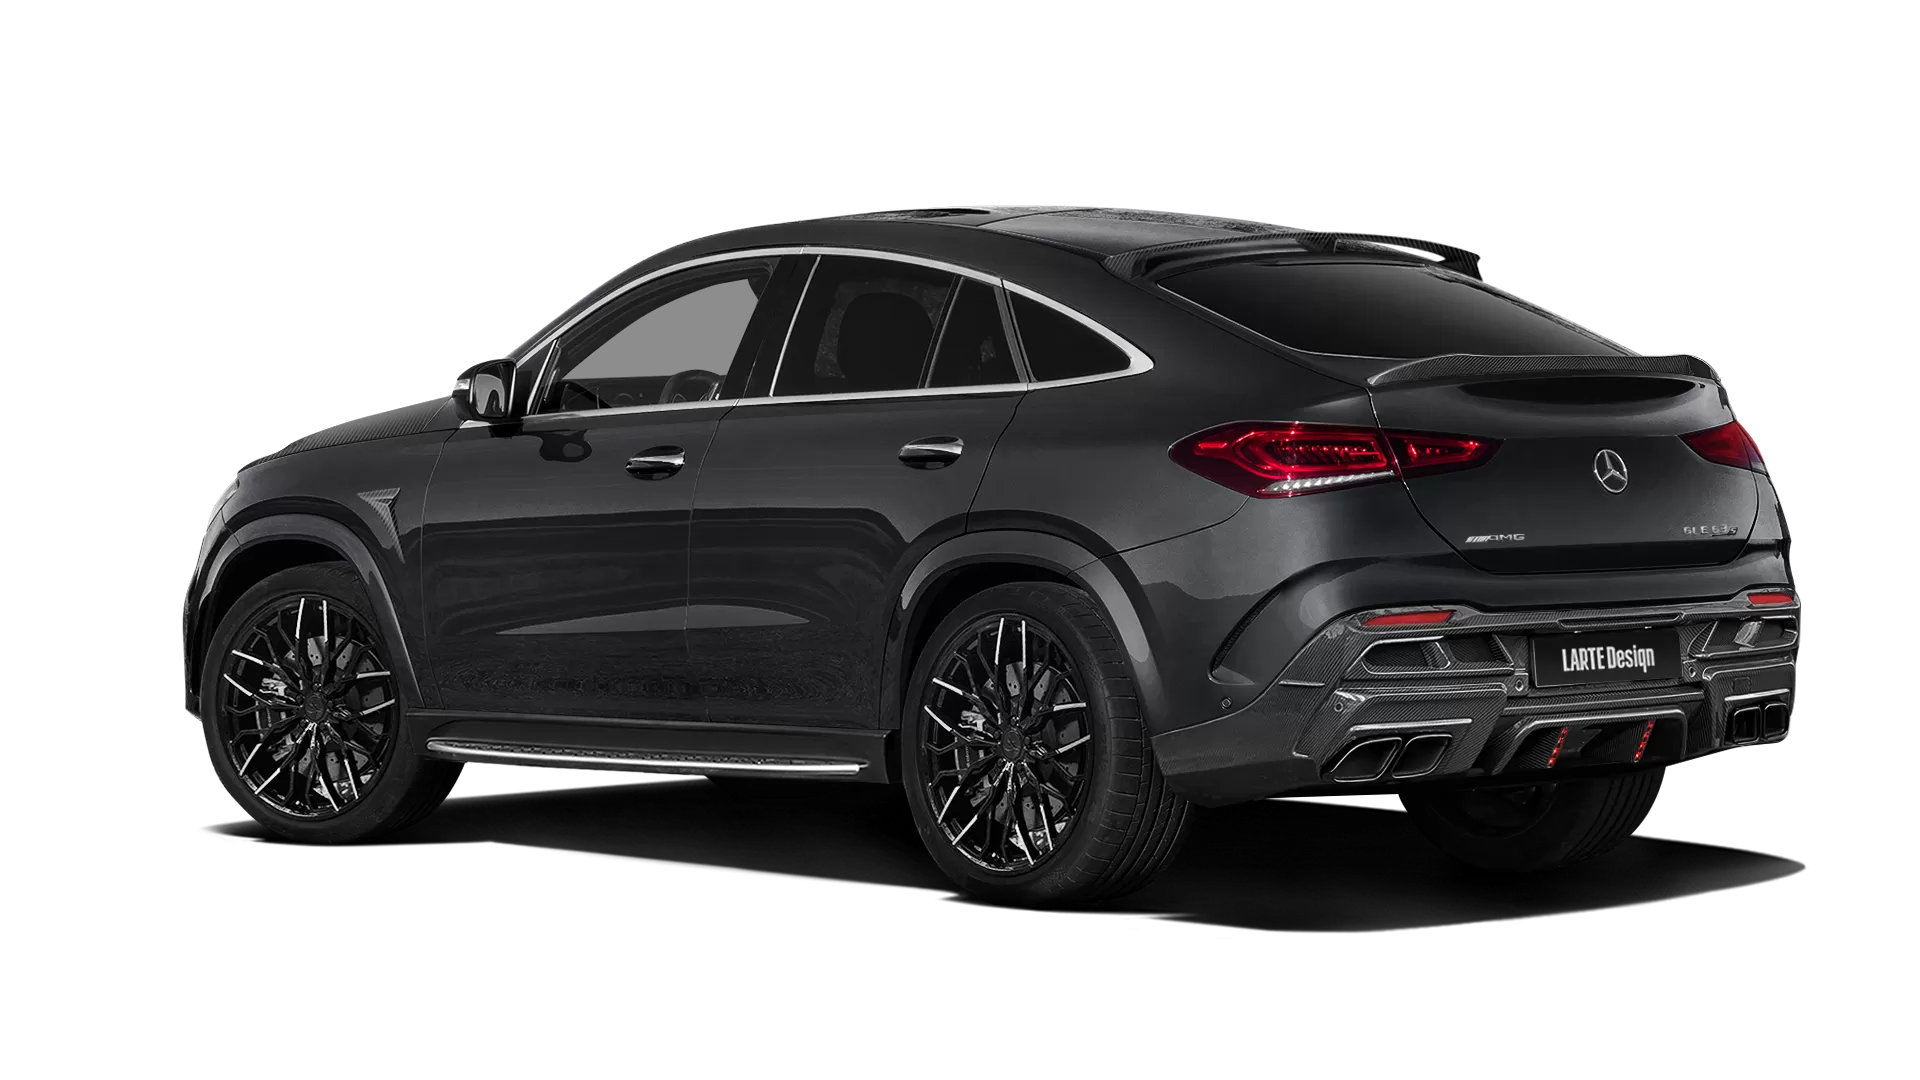 Mercedes GLE Coupe AMG 63 C167 with carbon body kit: back view shown in Obsidian Black